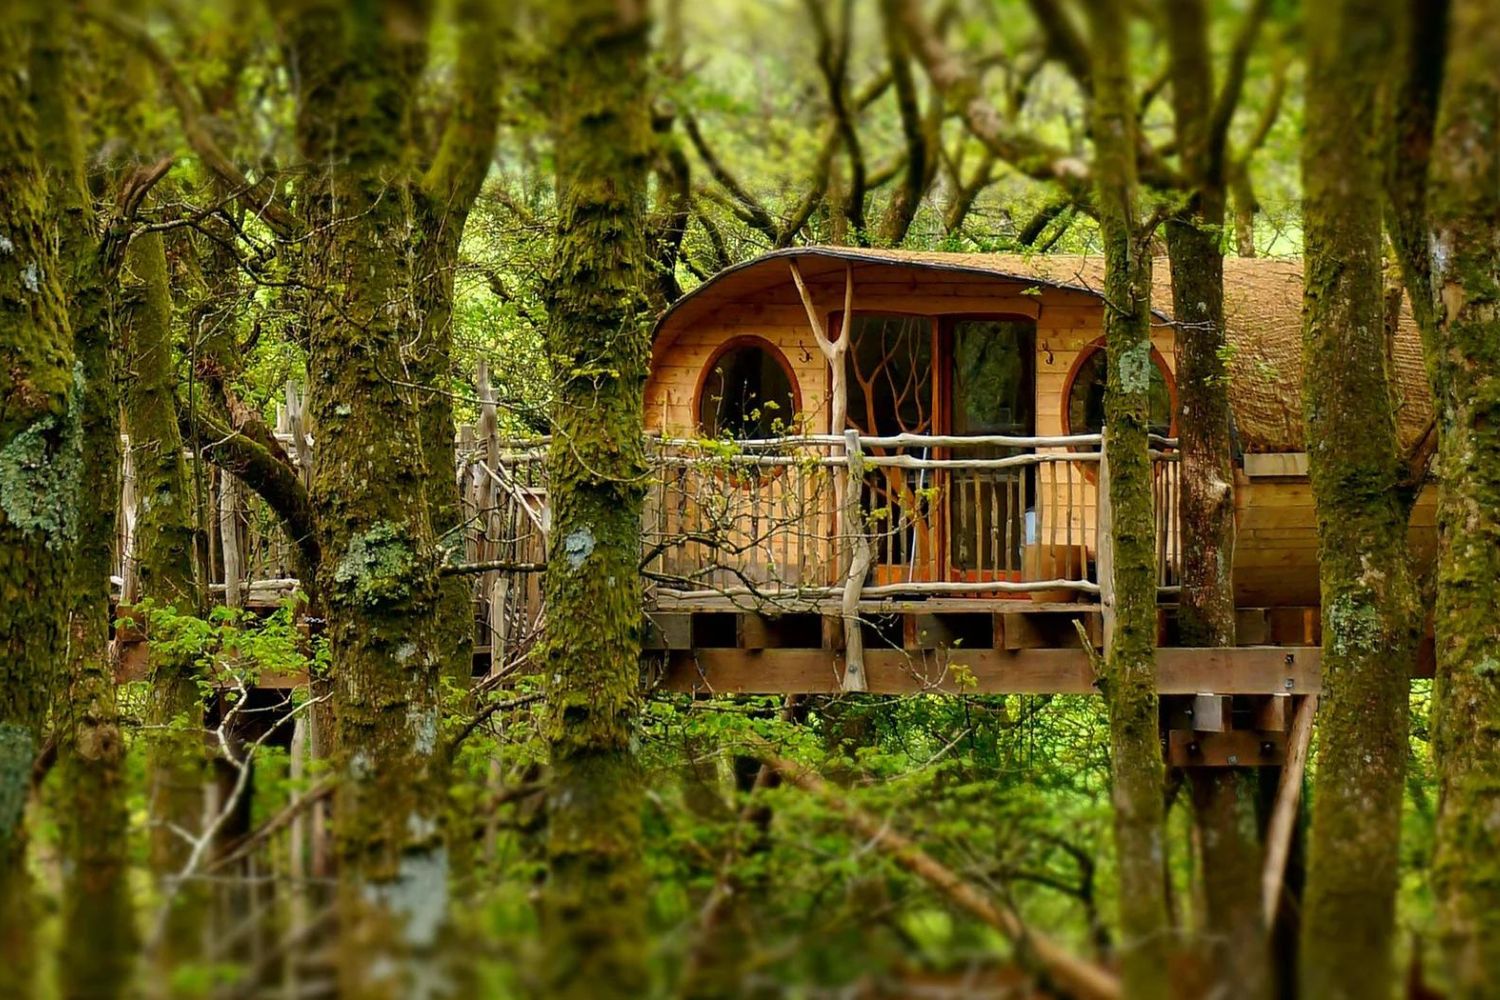 Snapshot of wooden treehouse in between trees - Living Room Treehouse Experience, Powys, Wales